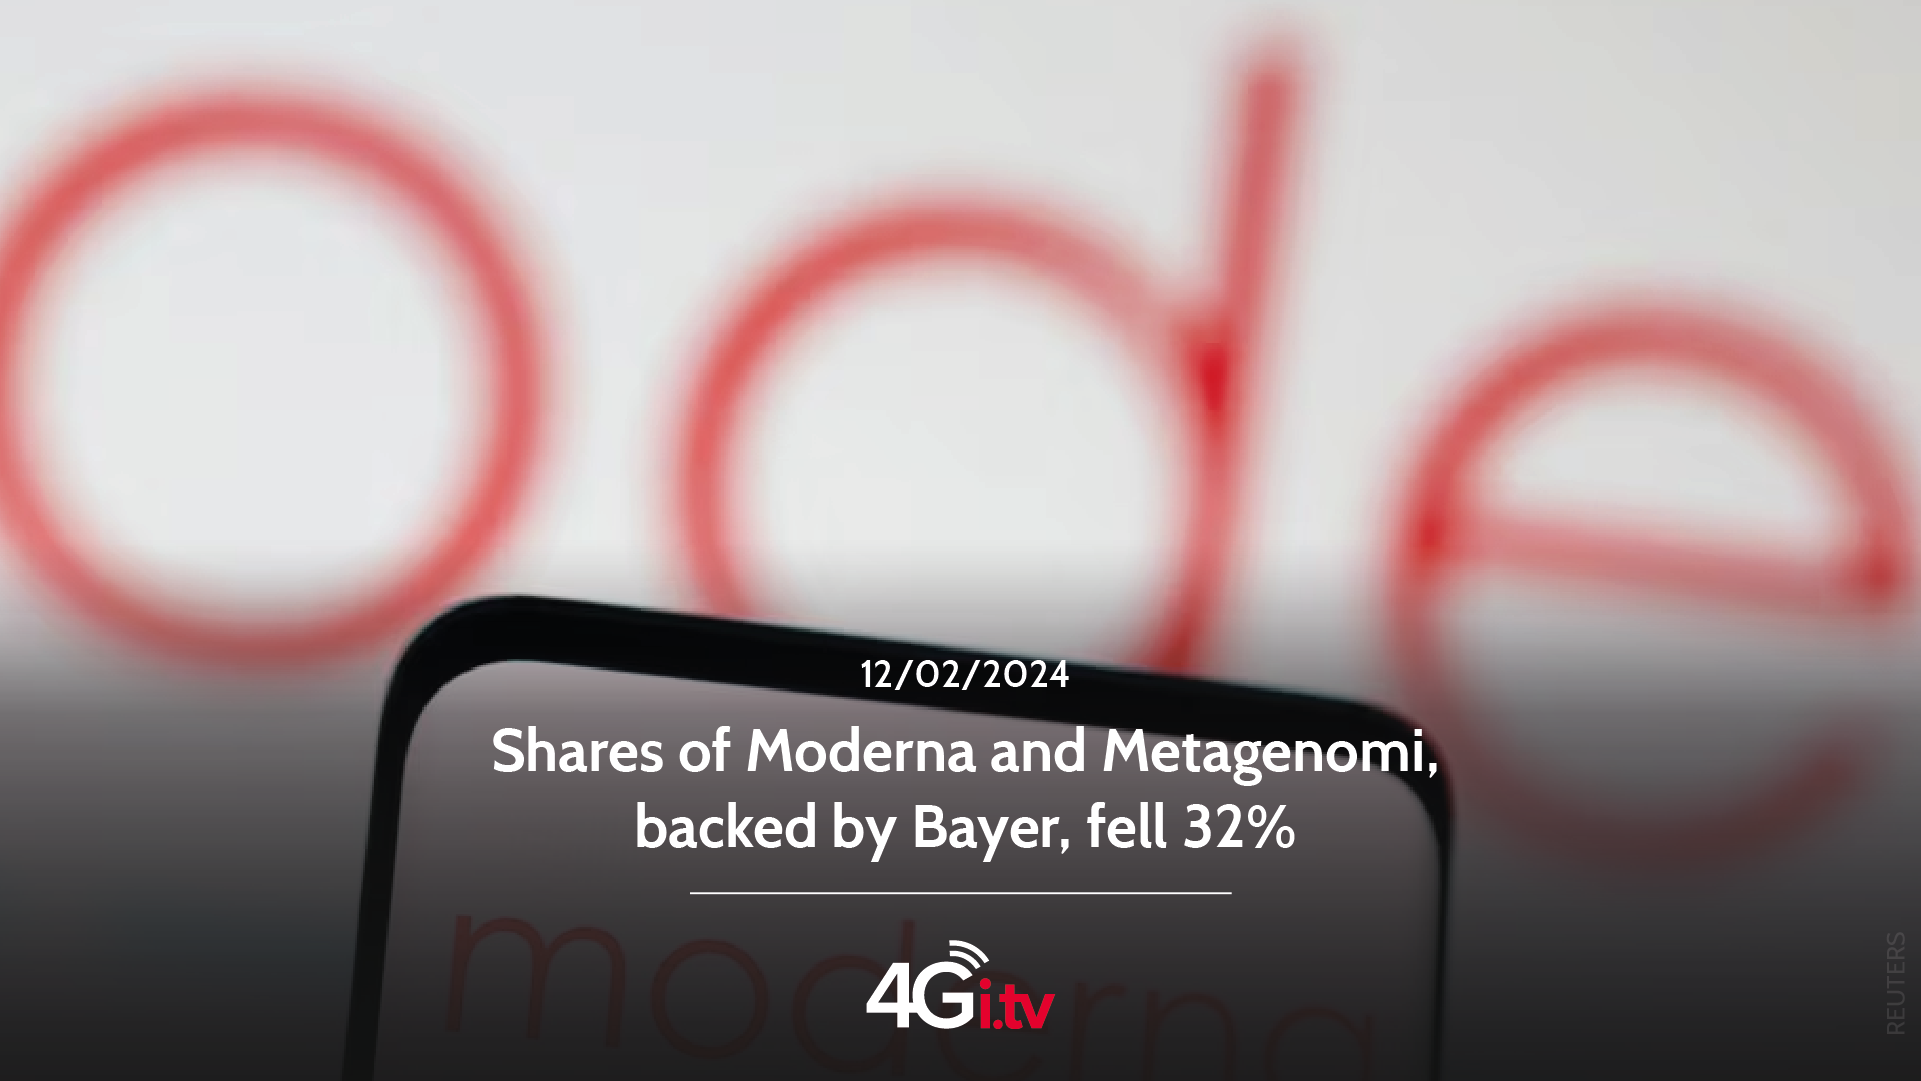 Подробнее о статье Shares of Moderna and Metagenomi, backed by Bayer, fell 32%